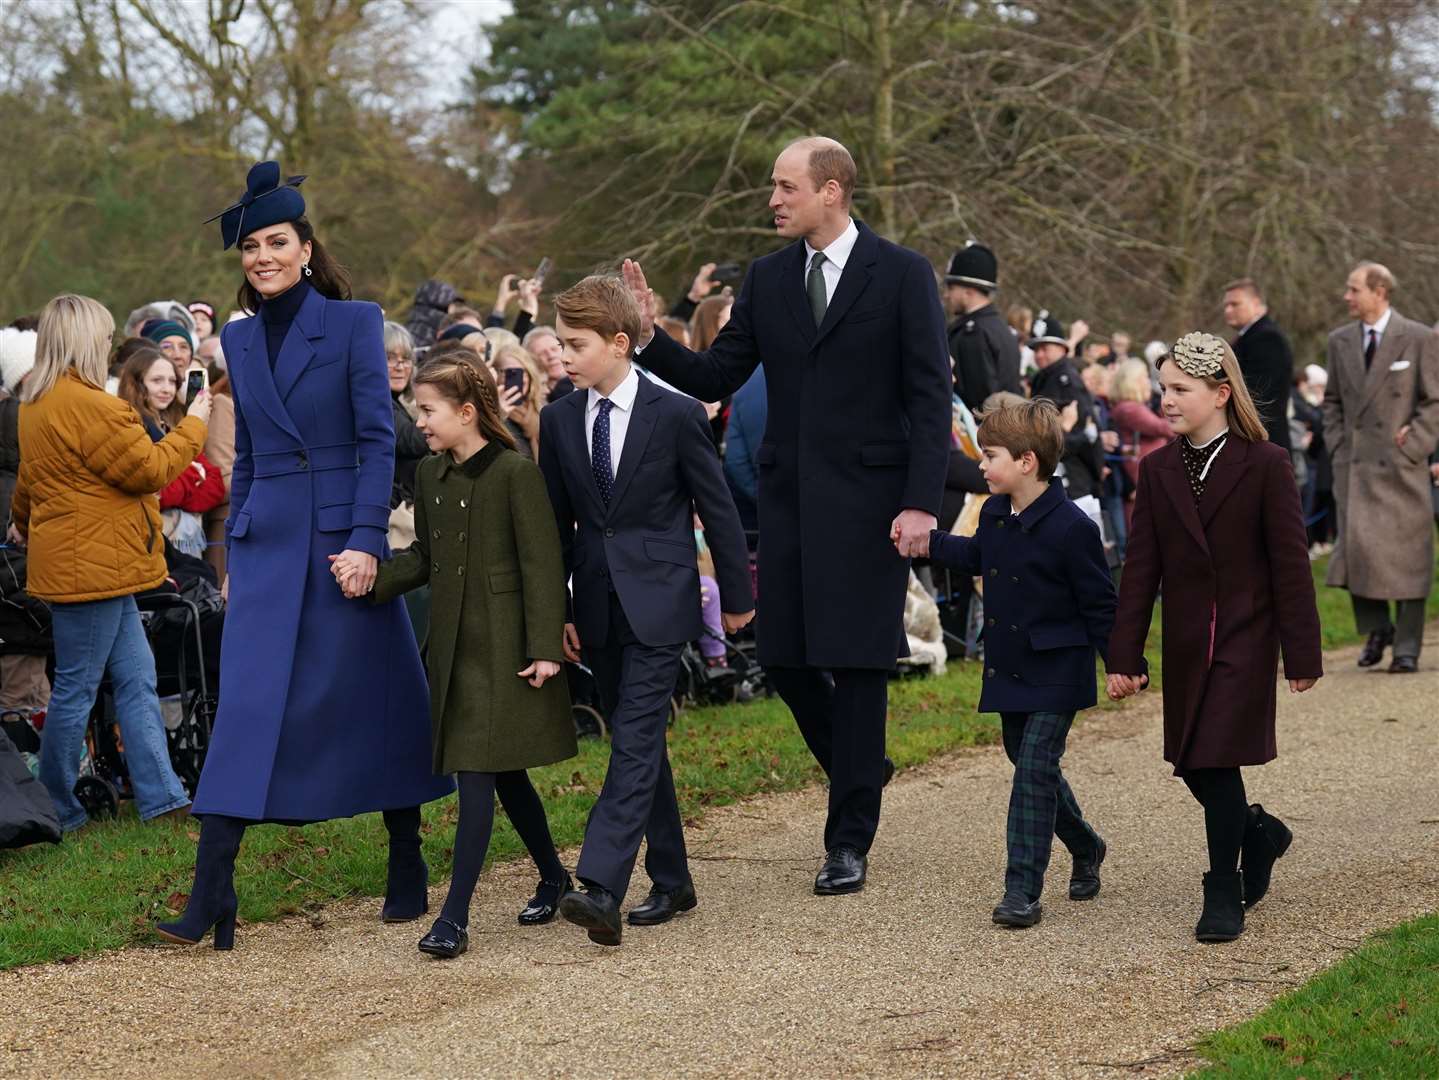 Christmas Day saw the Prince and Princess of Wales out with their children, Princess Charlotte, Prince George and Prince Louis who held hands with Mia Tindall as they walked to church (Joe Giddens/PA)